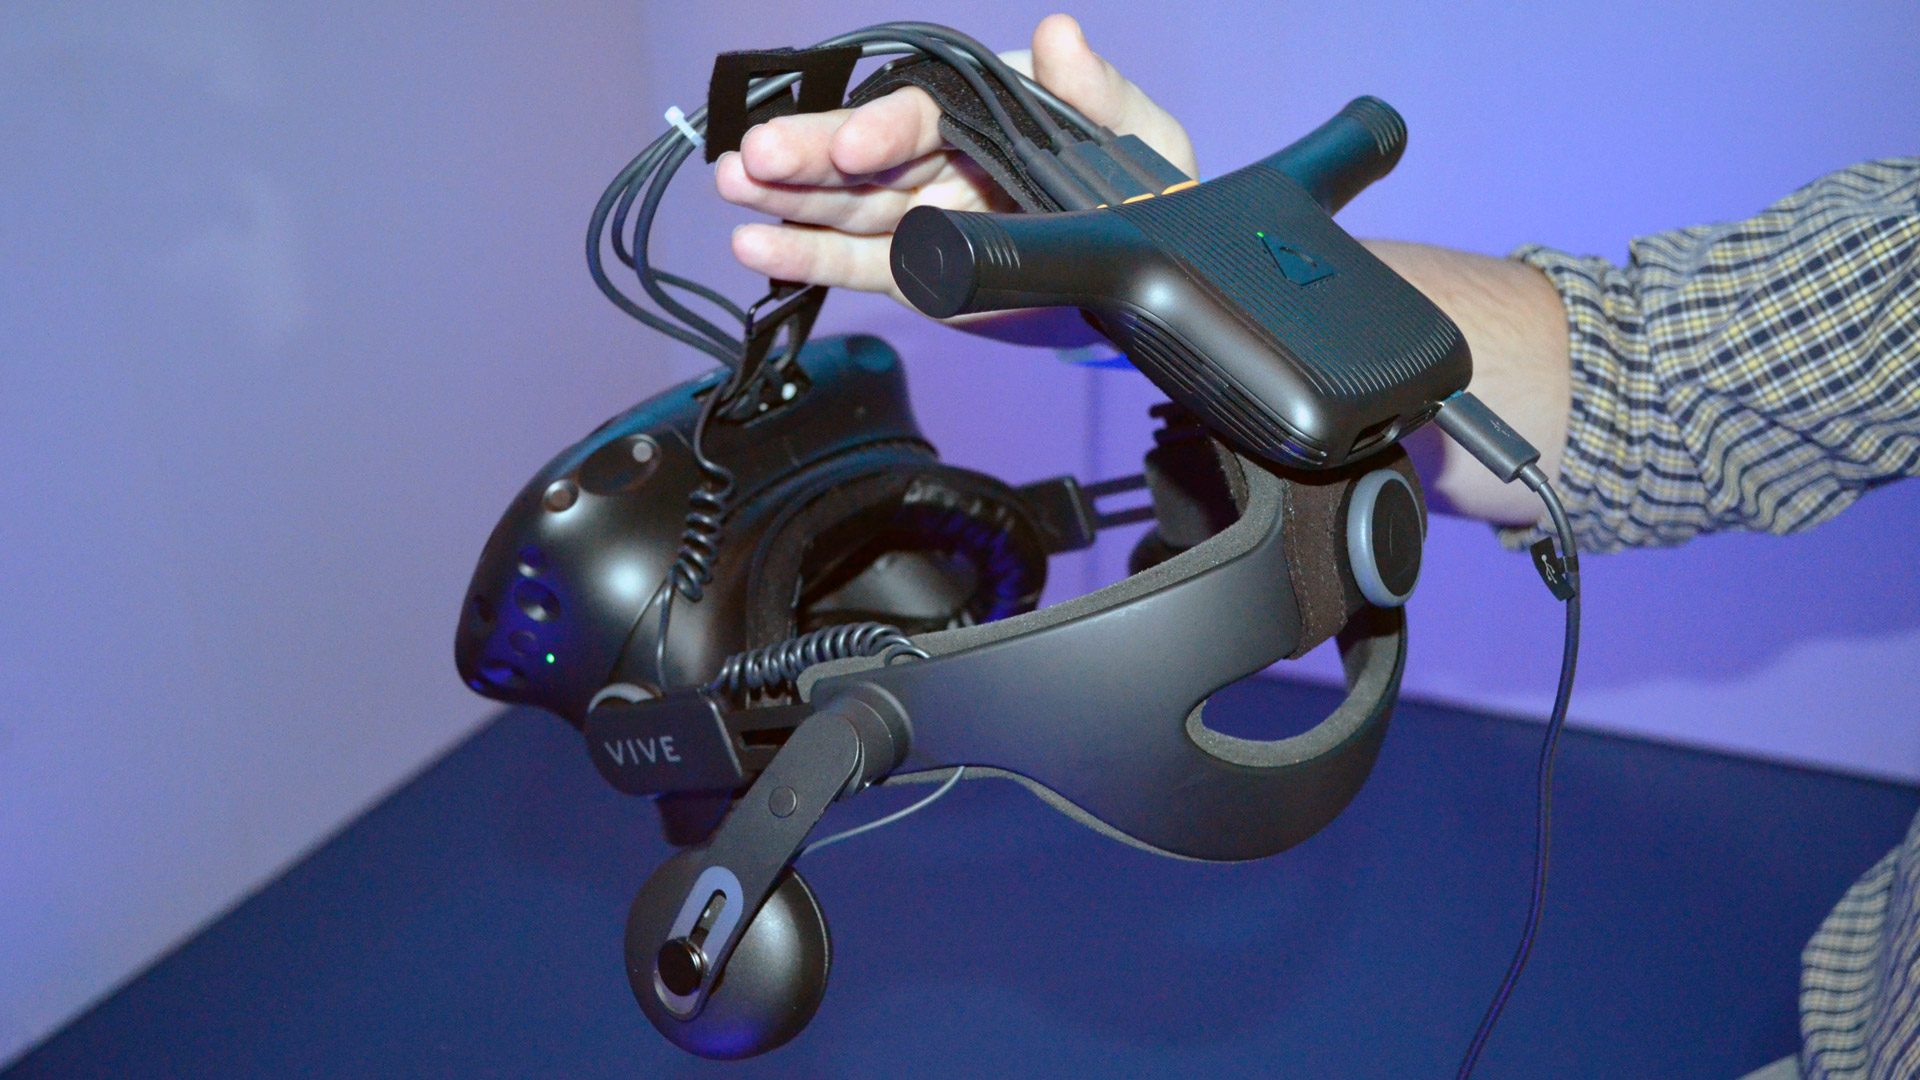 CES 2018: Vive Wireless Adapter Robust Connection Latency Too